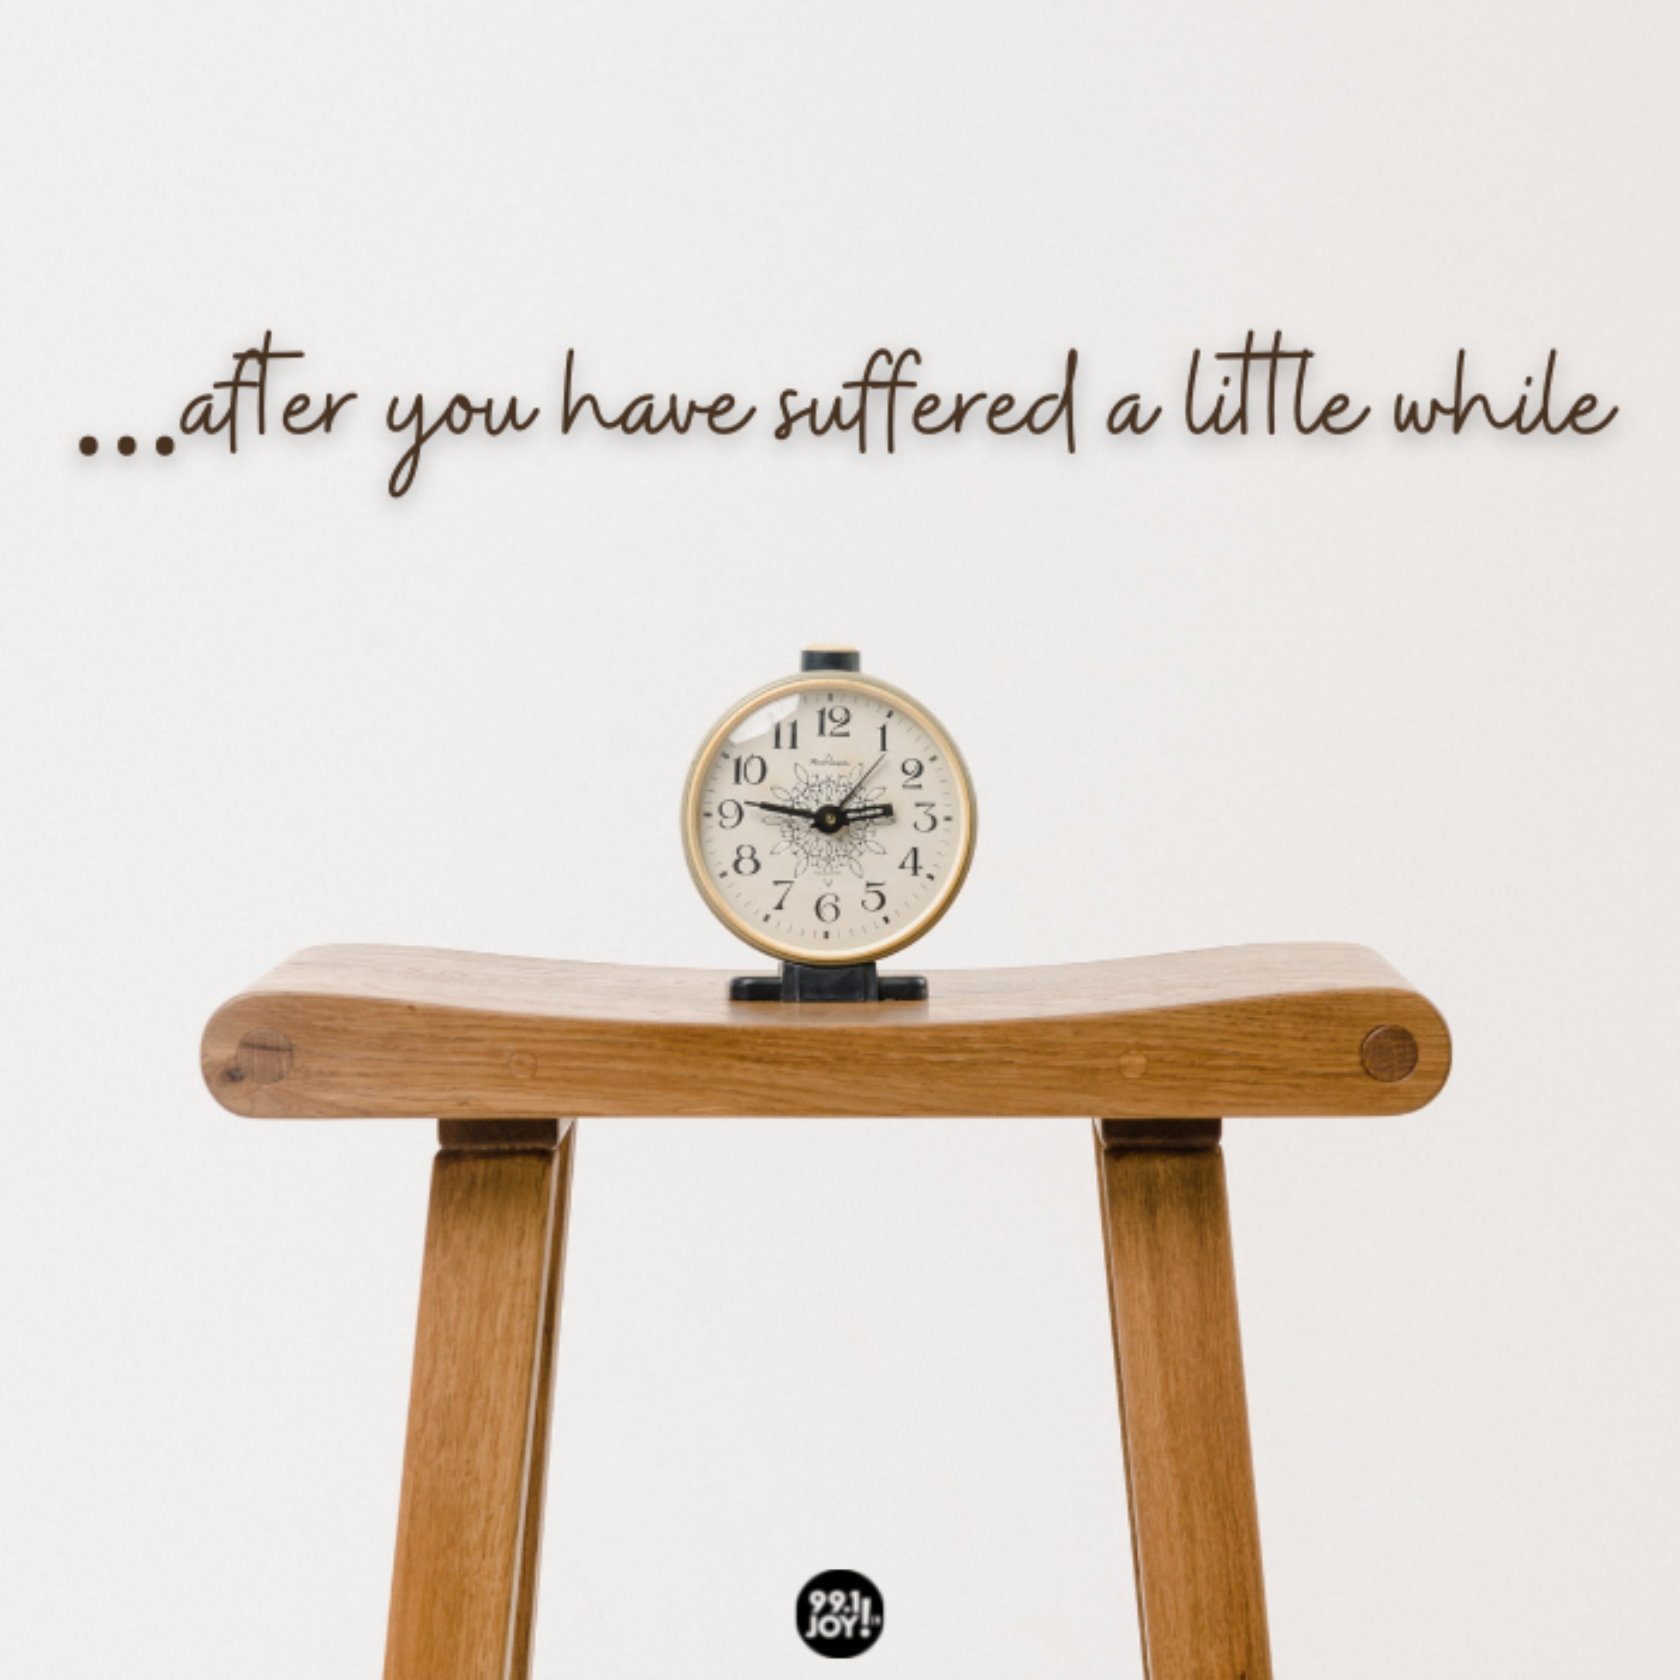 …After you have suffered a little while